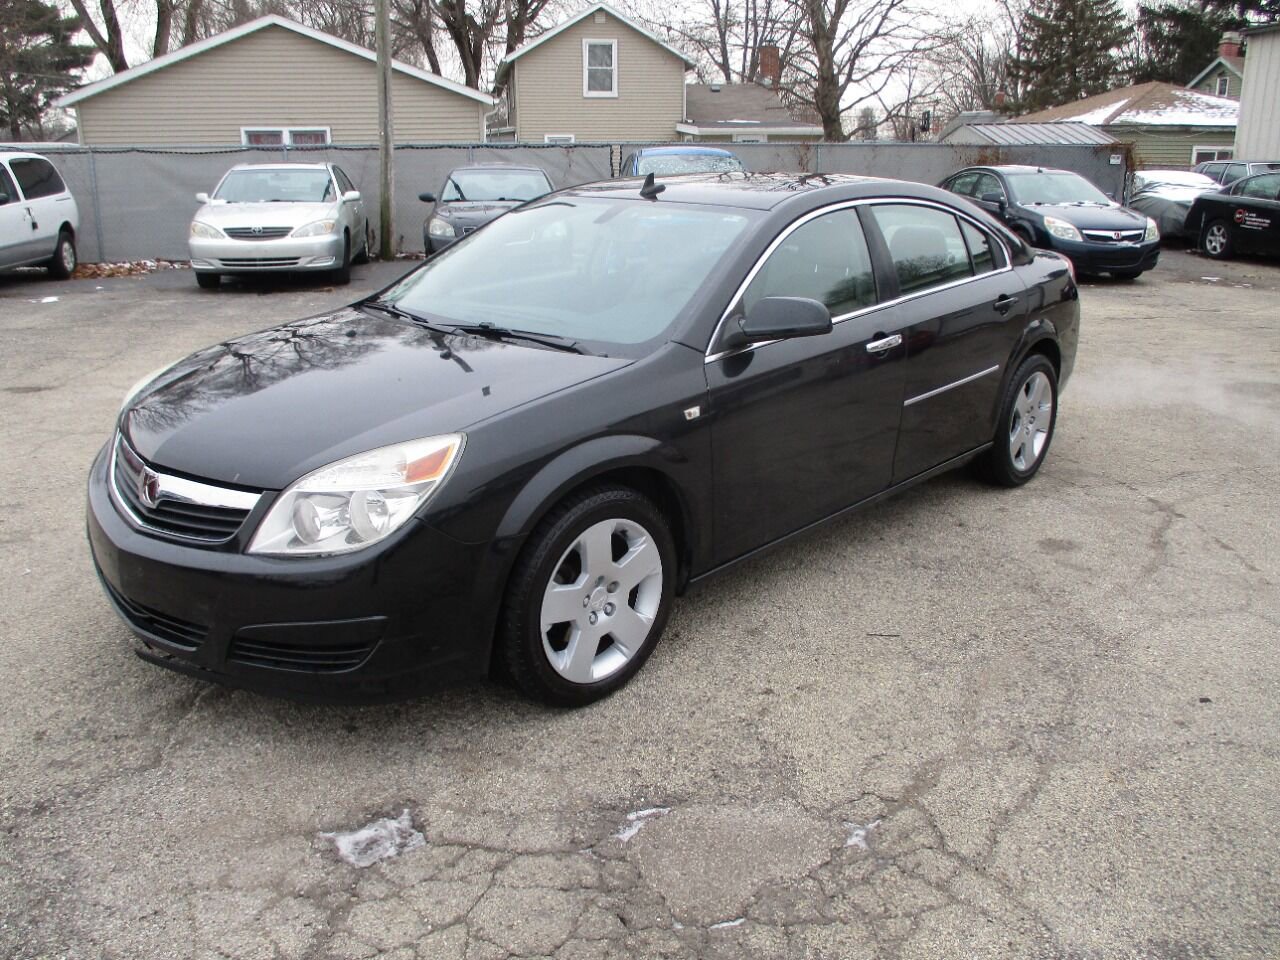 Used 2008 Saturn Aura for Sale in Chicago, IL (Test Drive at Home) - Kelley  Blue Book